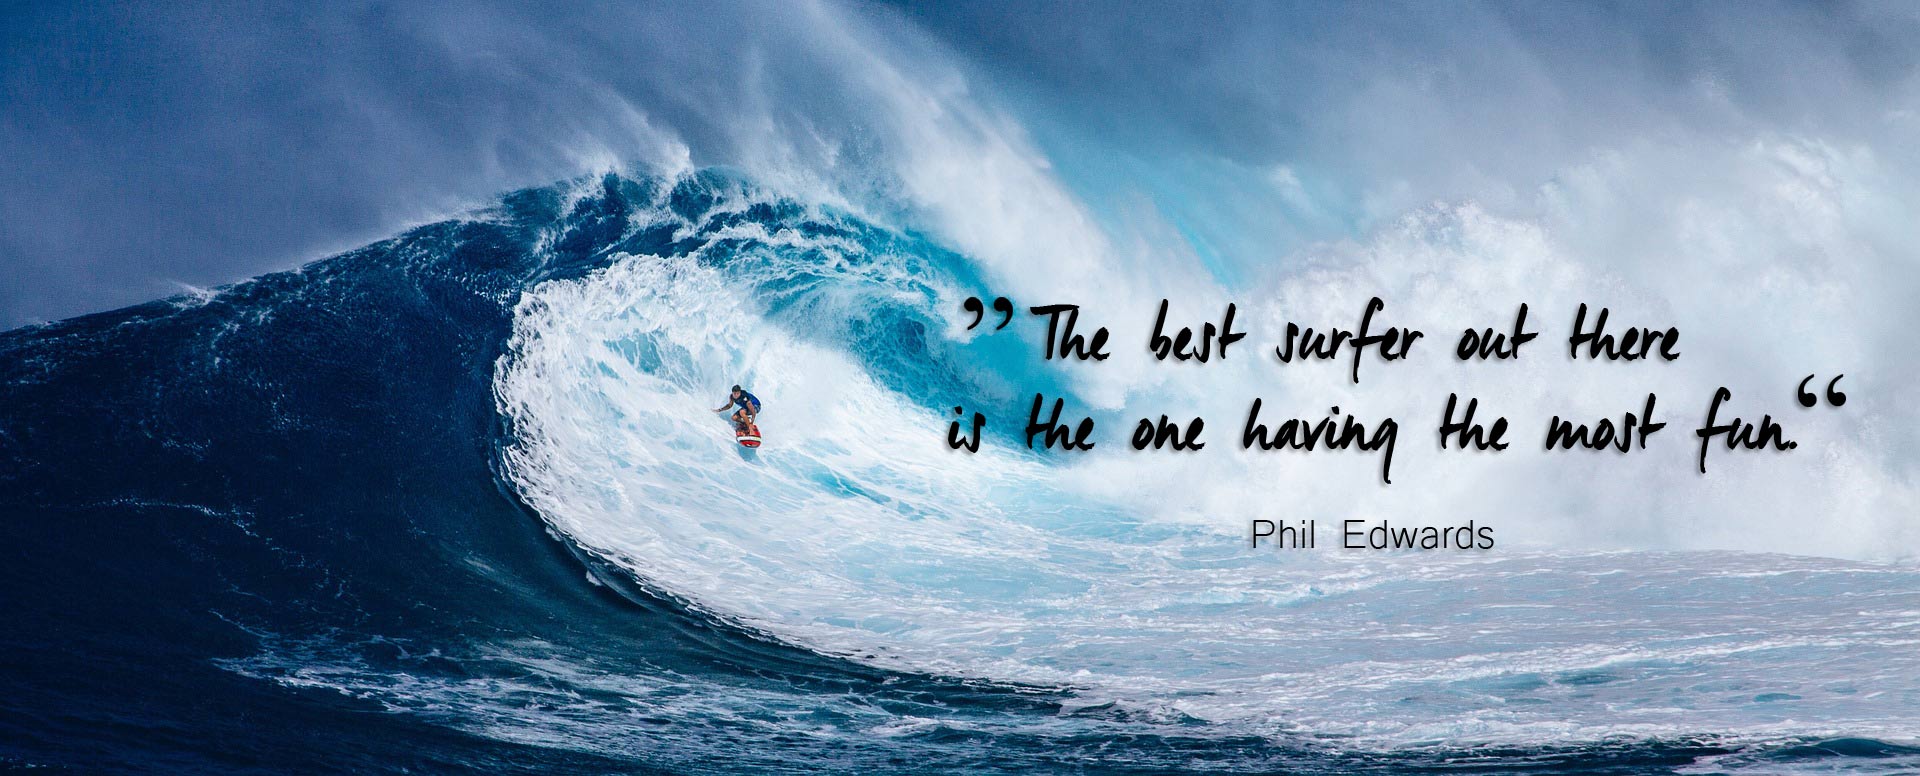 Surfing Quotes The Best Surfer 